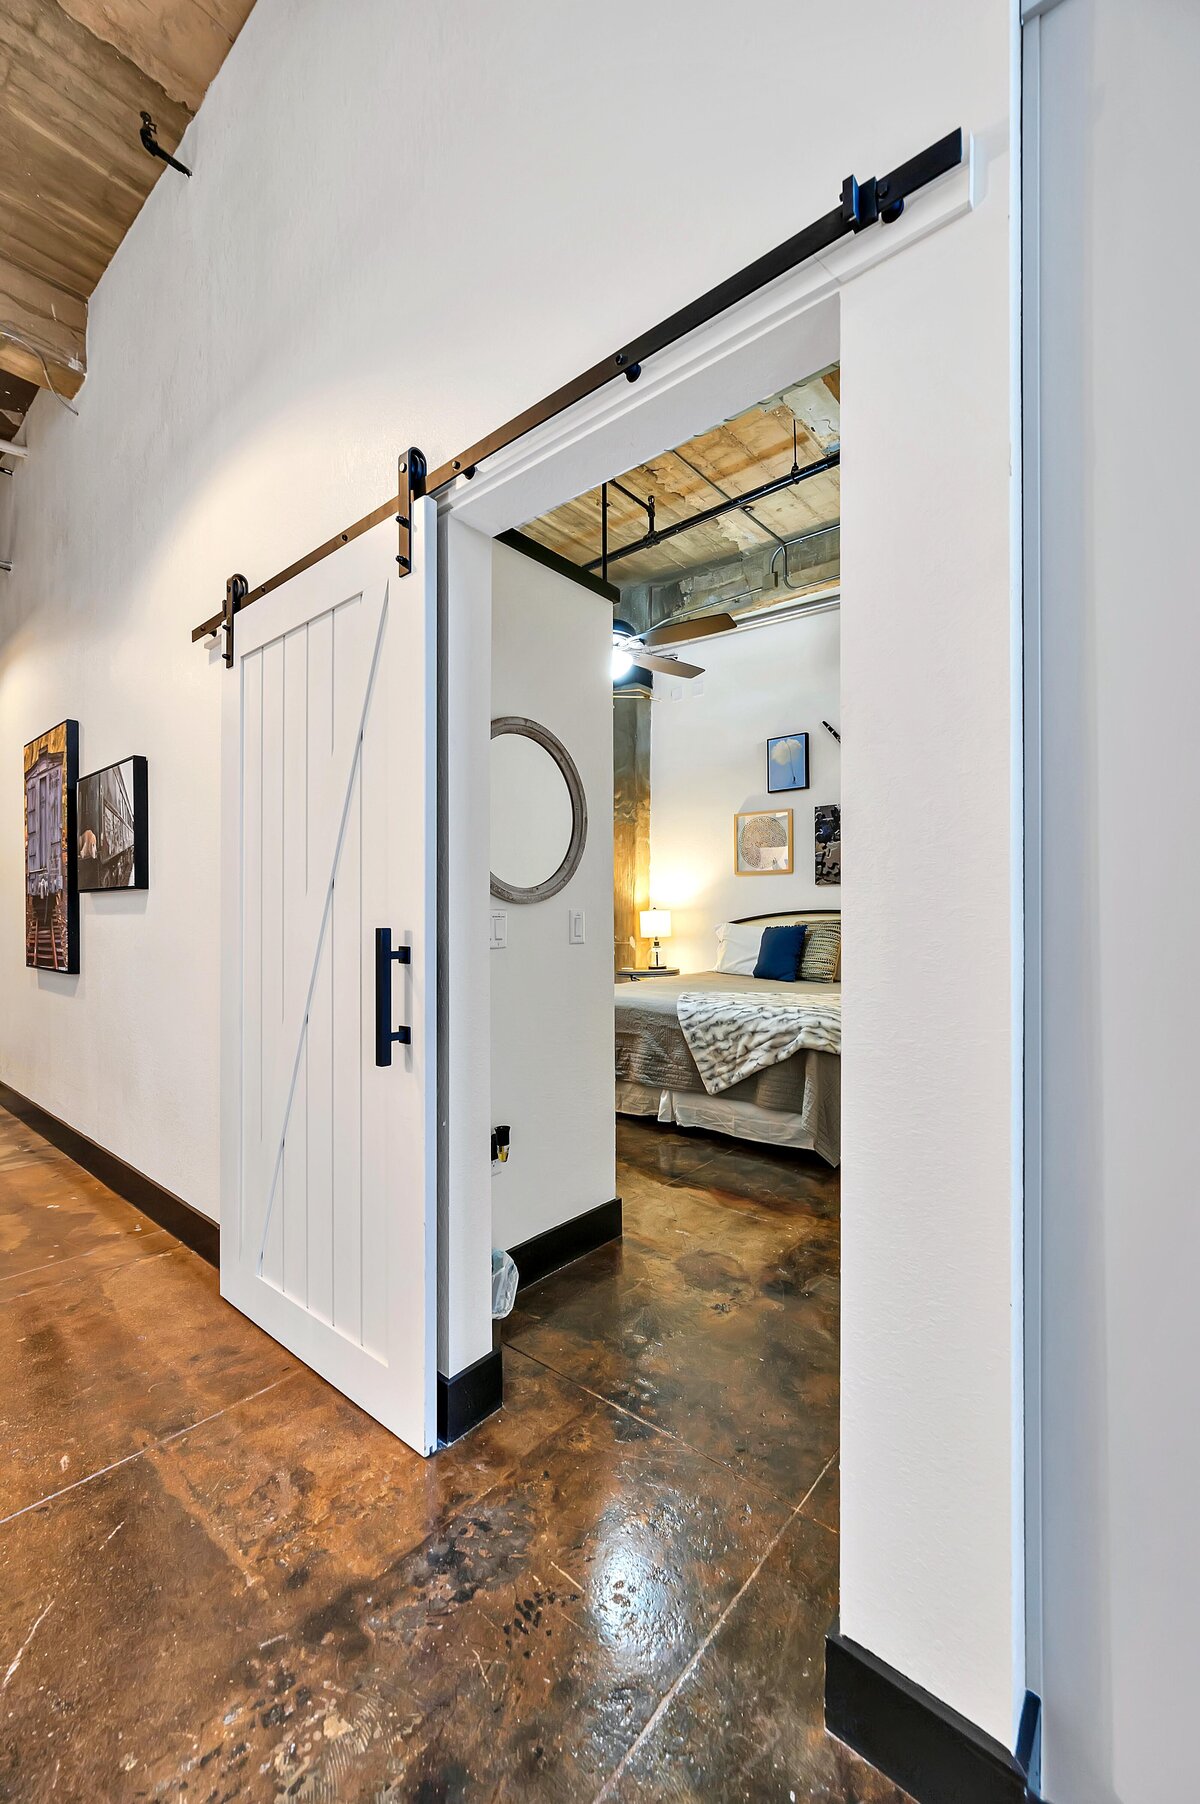 Beautiful sliding barn door attached to bedroom in this one-bedroom, one-bathroom vintage industrial condo with Smart TV, free Wi-Fi, and washer/dryer located in downtown Waco, TX.